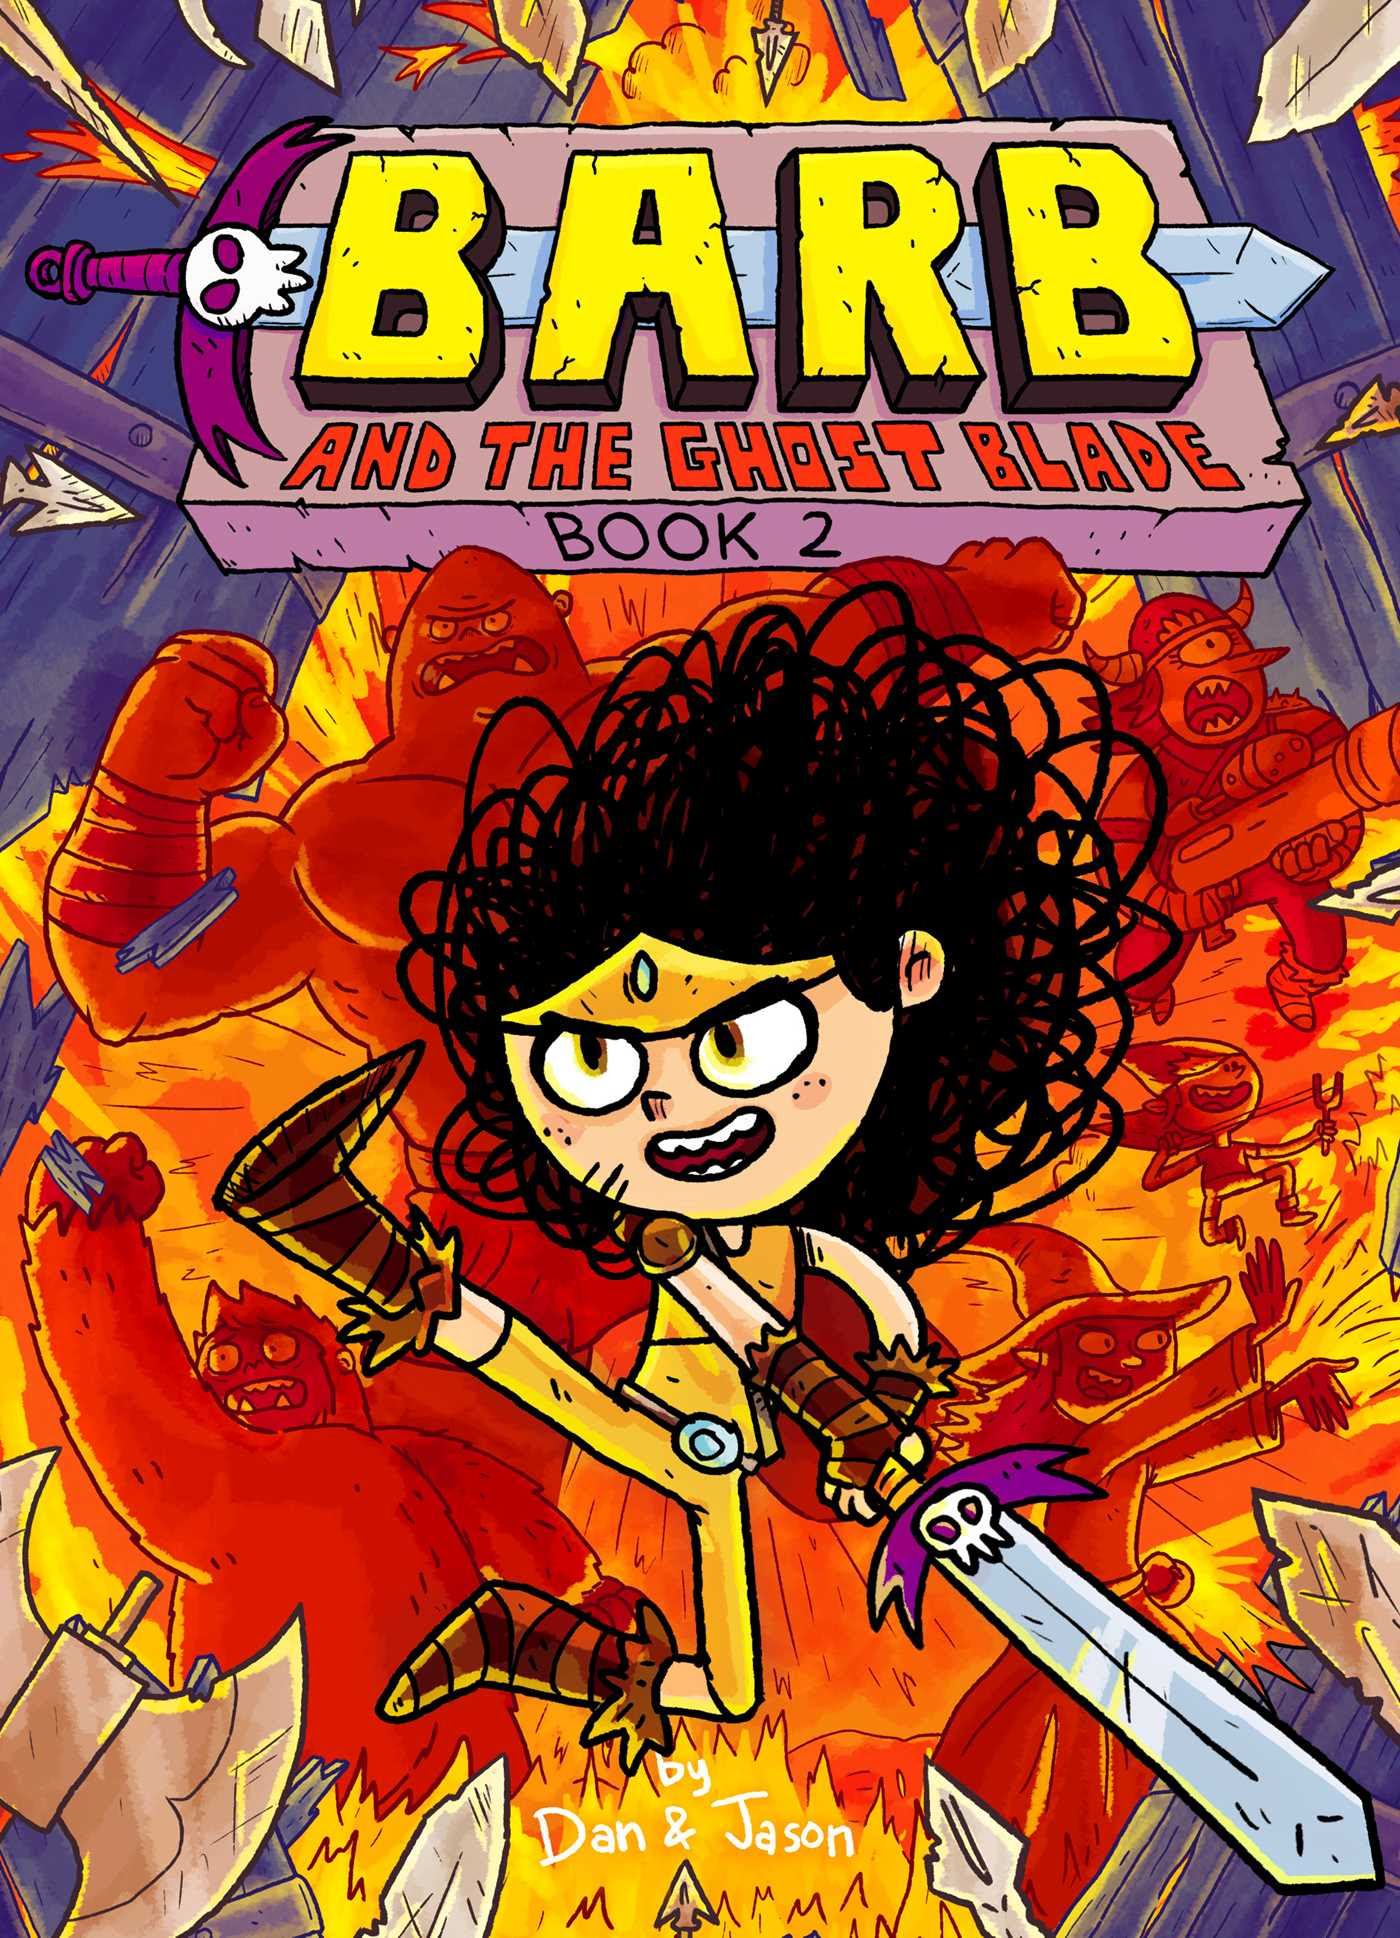 pdf download Barb and the Ghost Blade